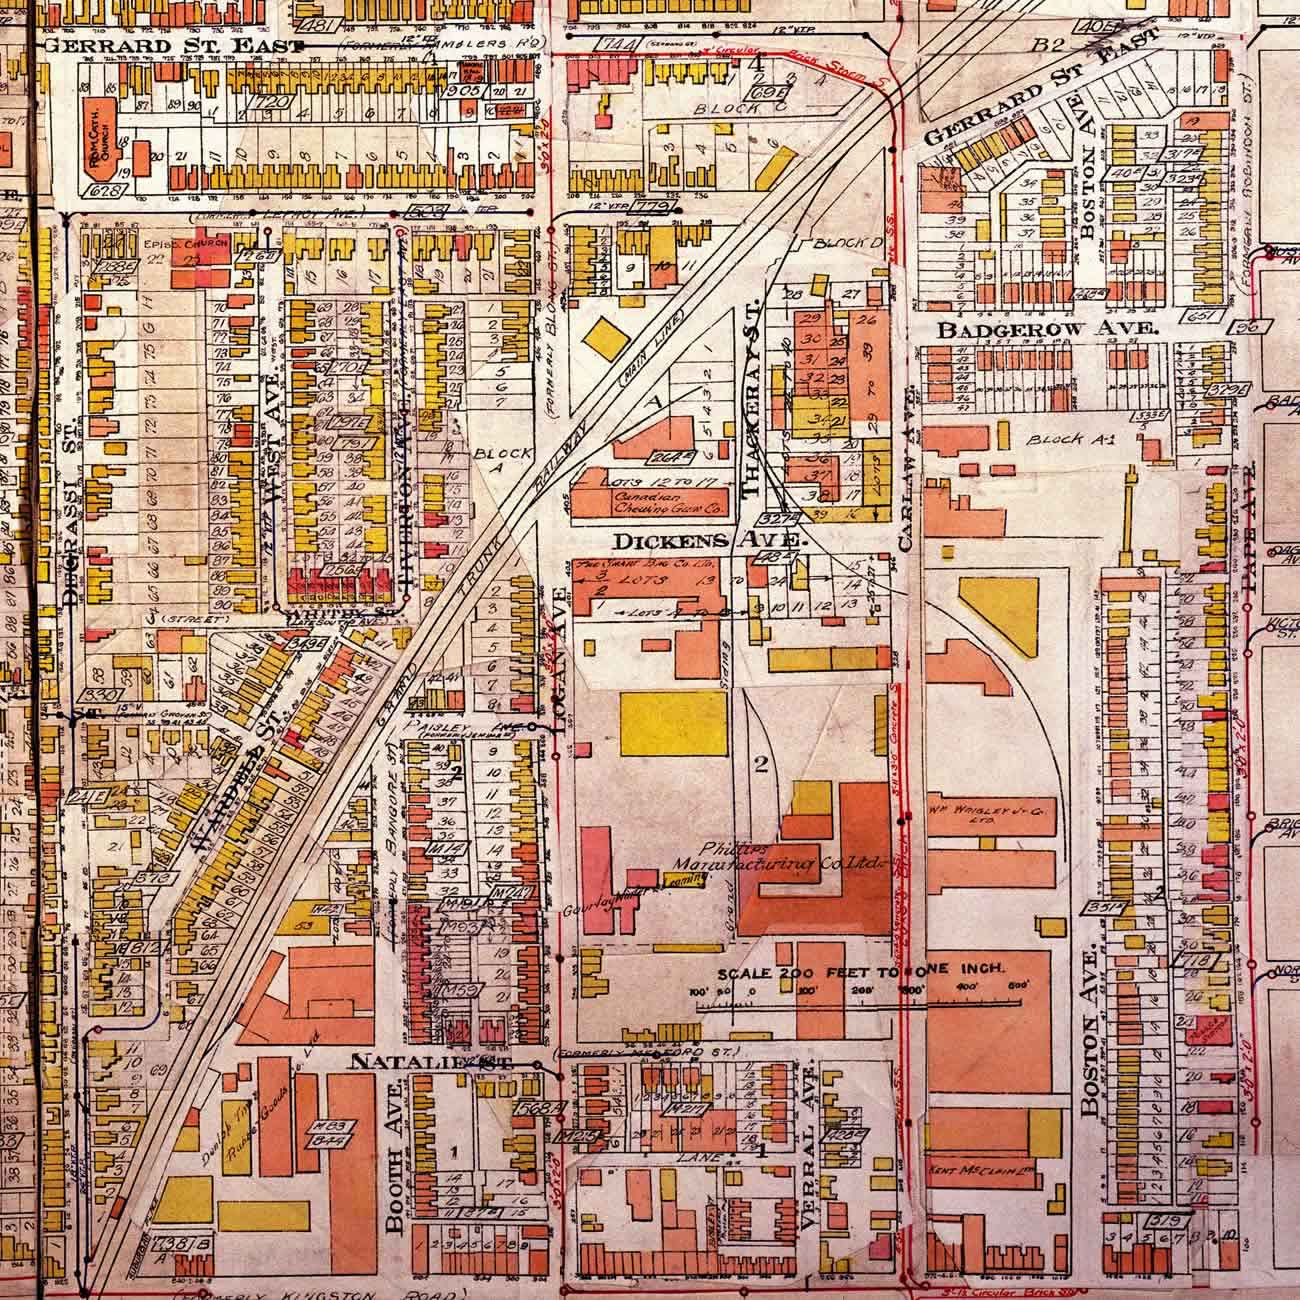 A historical colour map of the Dundas and Carlaw area in then Ward 1 in 1924. Most buildings are in pink, meaning they are brick buildings. Some buildings are yellow, meaning they are wood constructions.